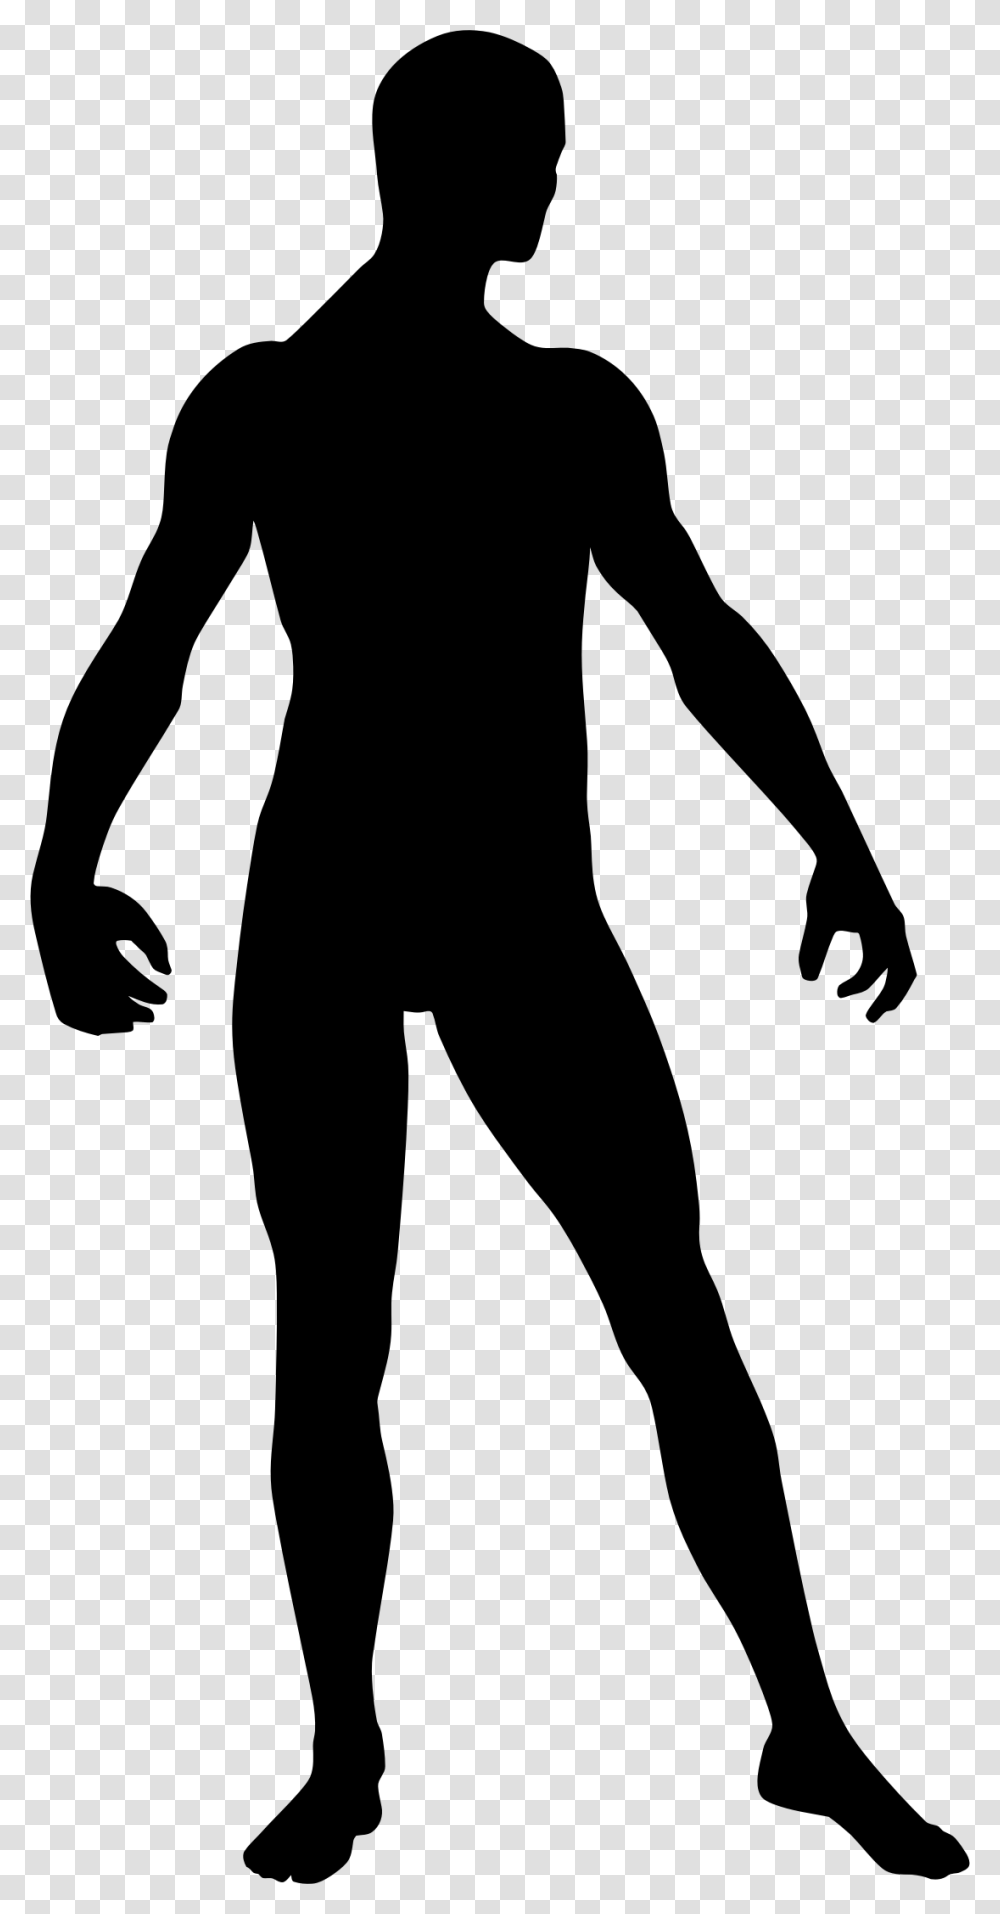 Man Praying Silhouette Areas To Target In A Fight, Gray, World Of Warcraft Transparent Png